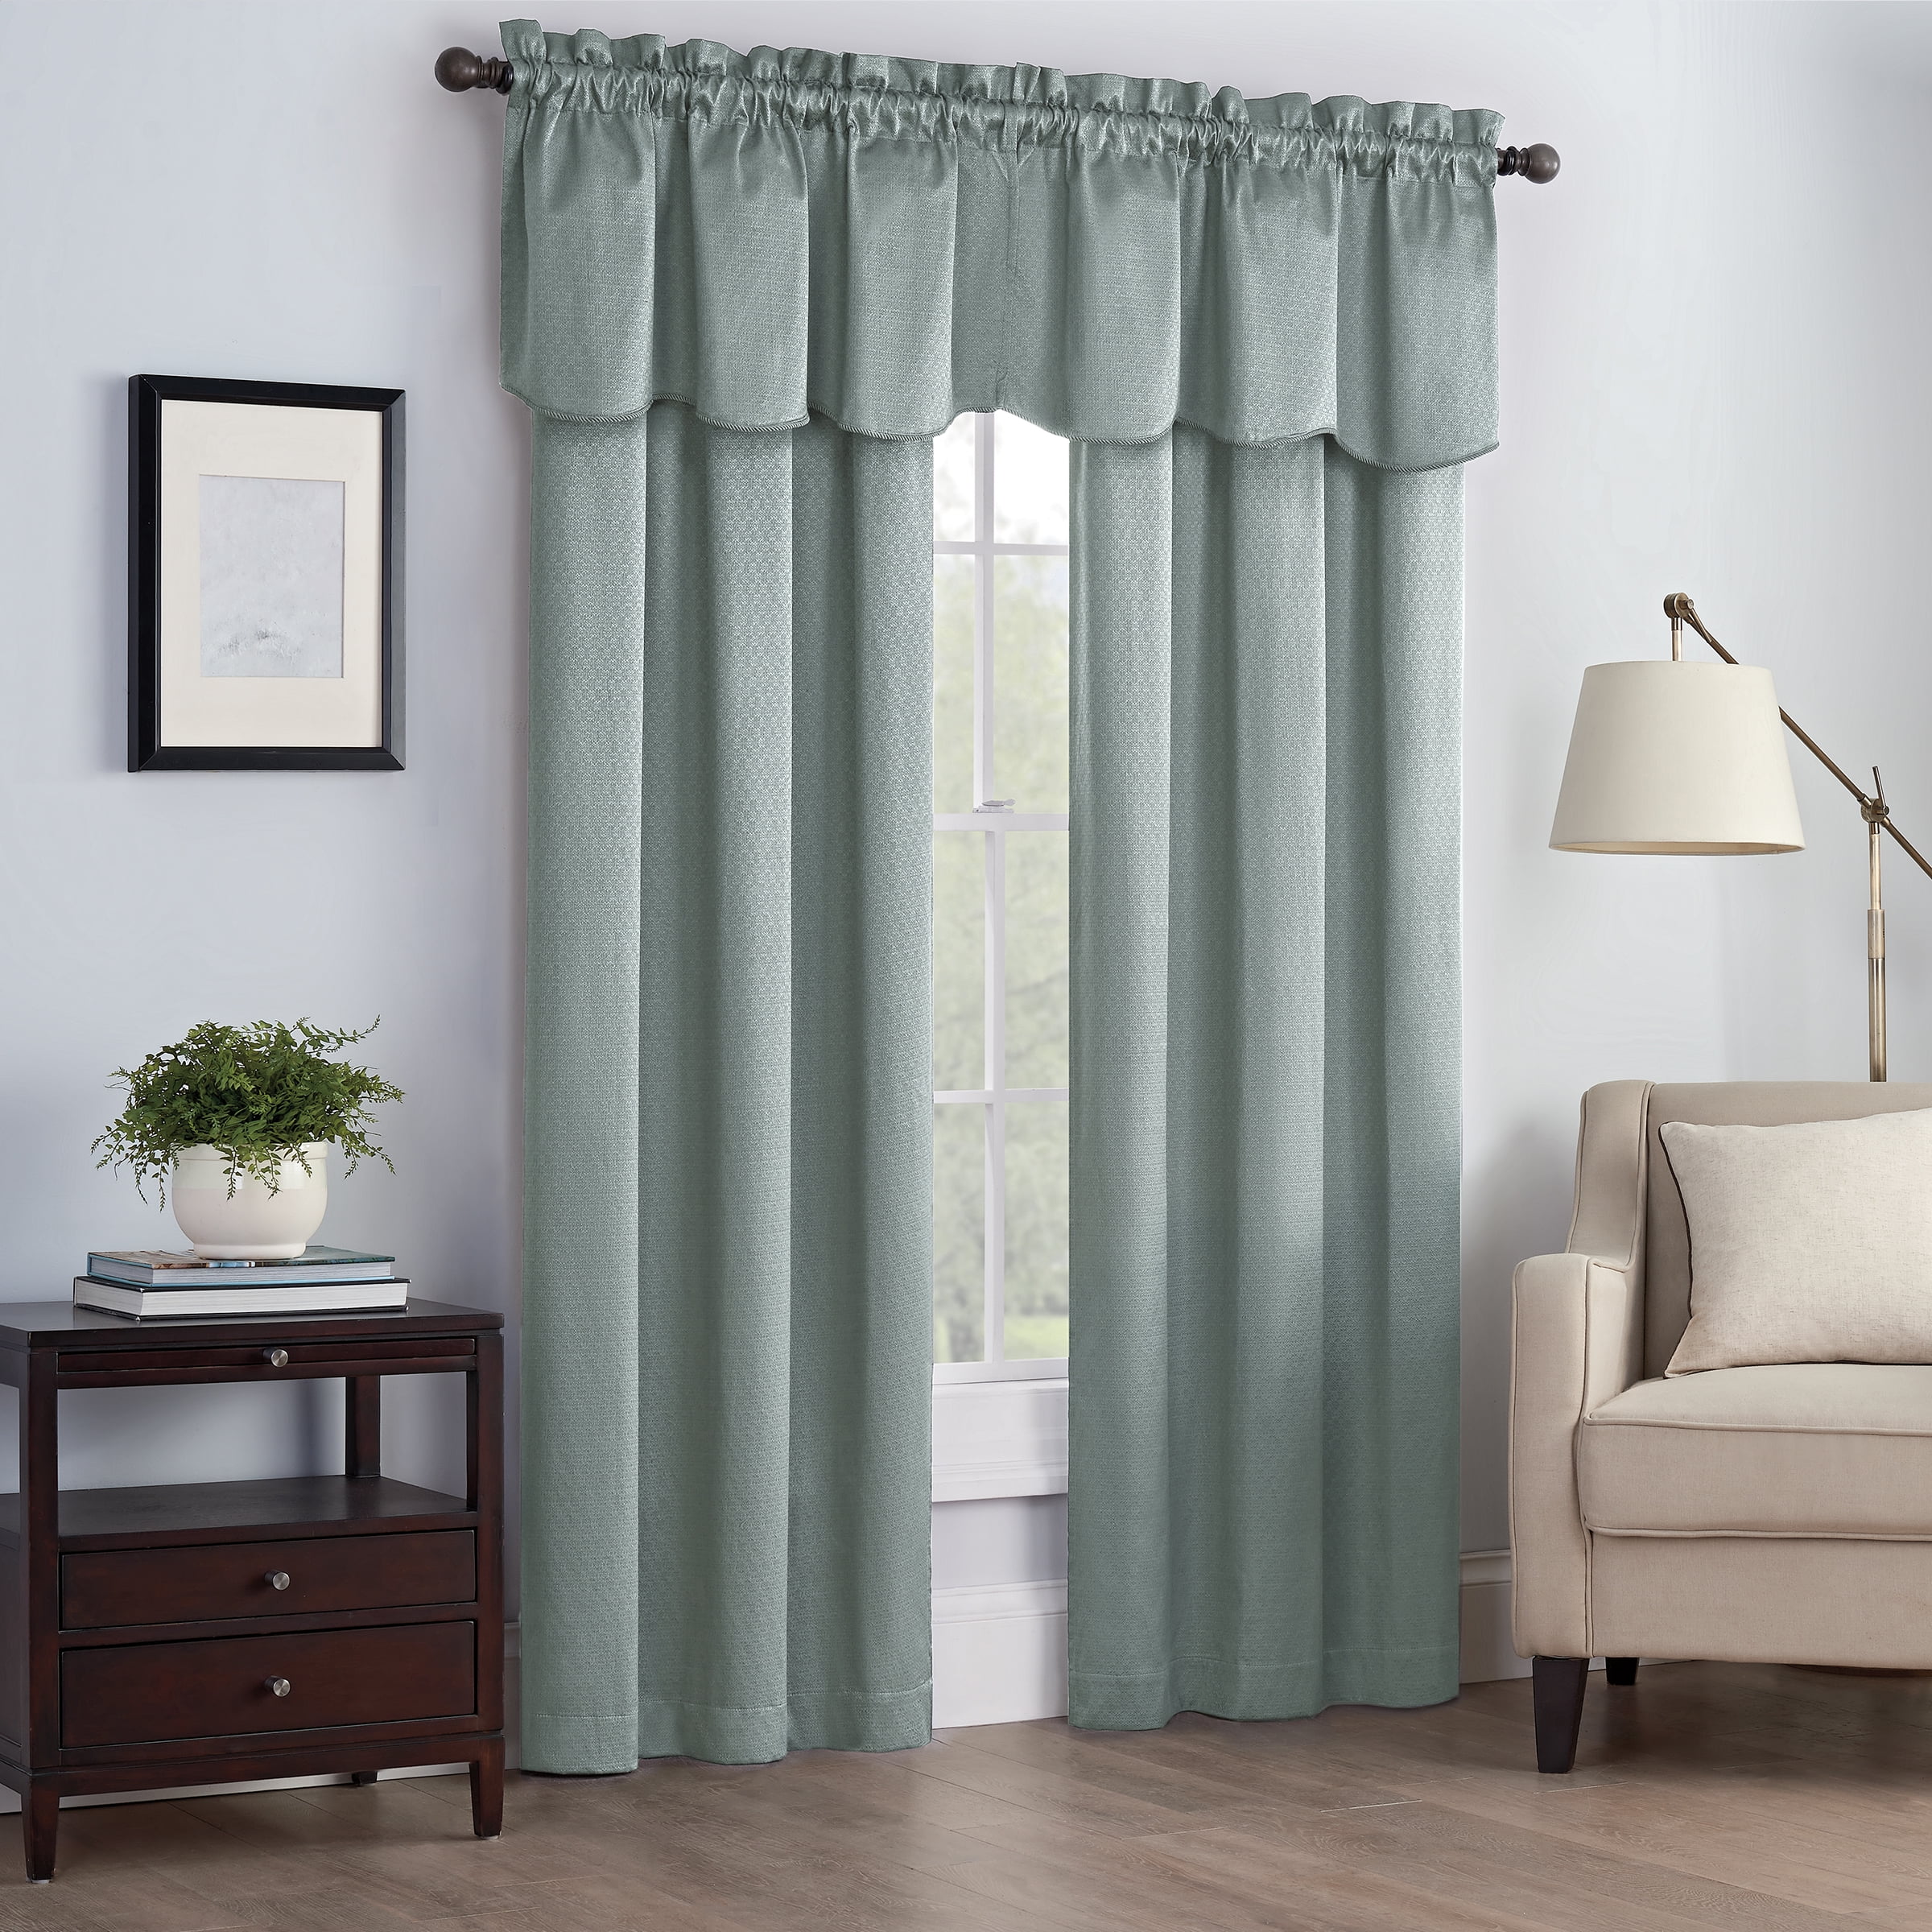 Eclipse Kendall Ivory Blackout Curtains Thermaback 42"x 84" for sale online 